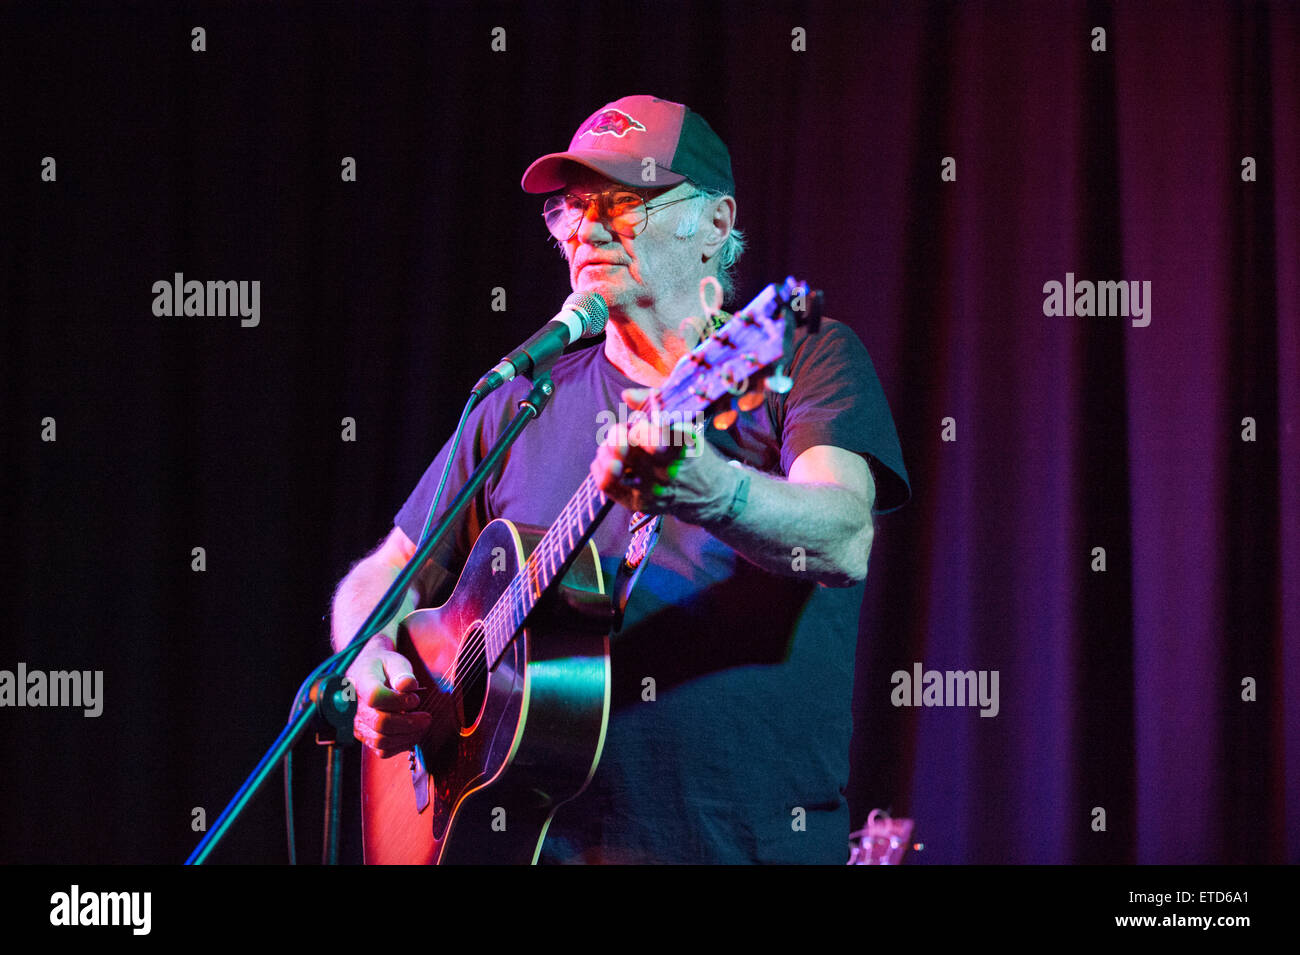 Singer songwriter  Michael Chapman in concert at The Continental, Preston, Lancashire, UK. Stock Photo